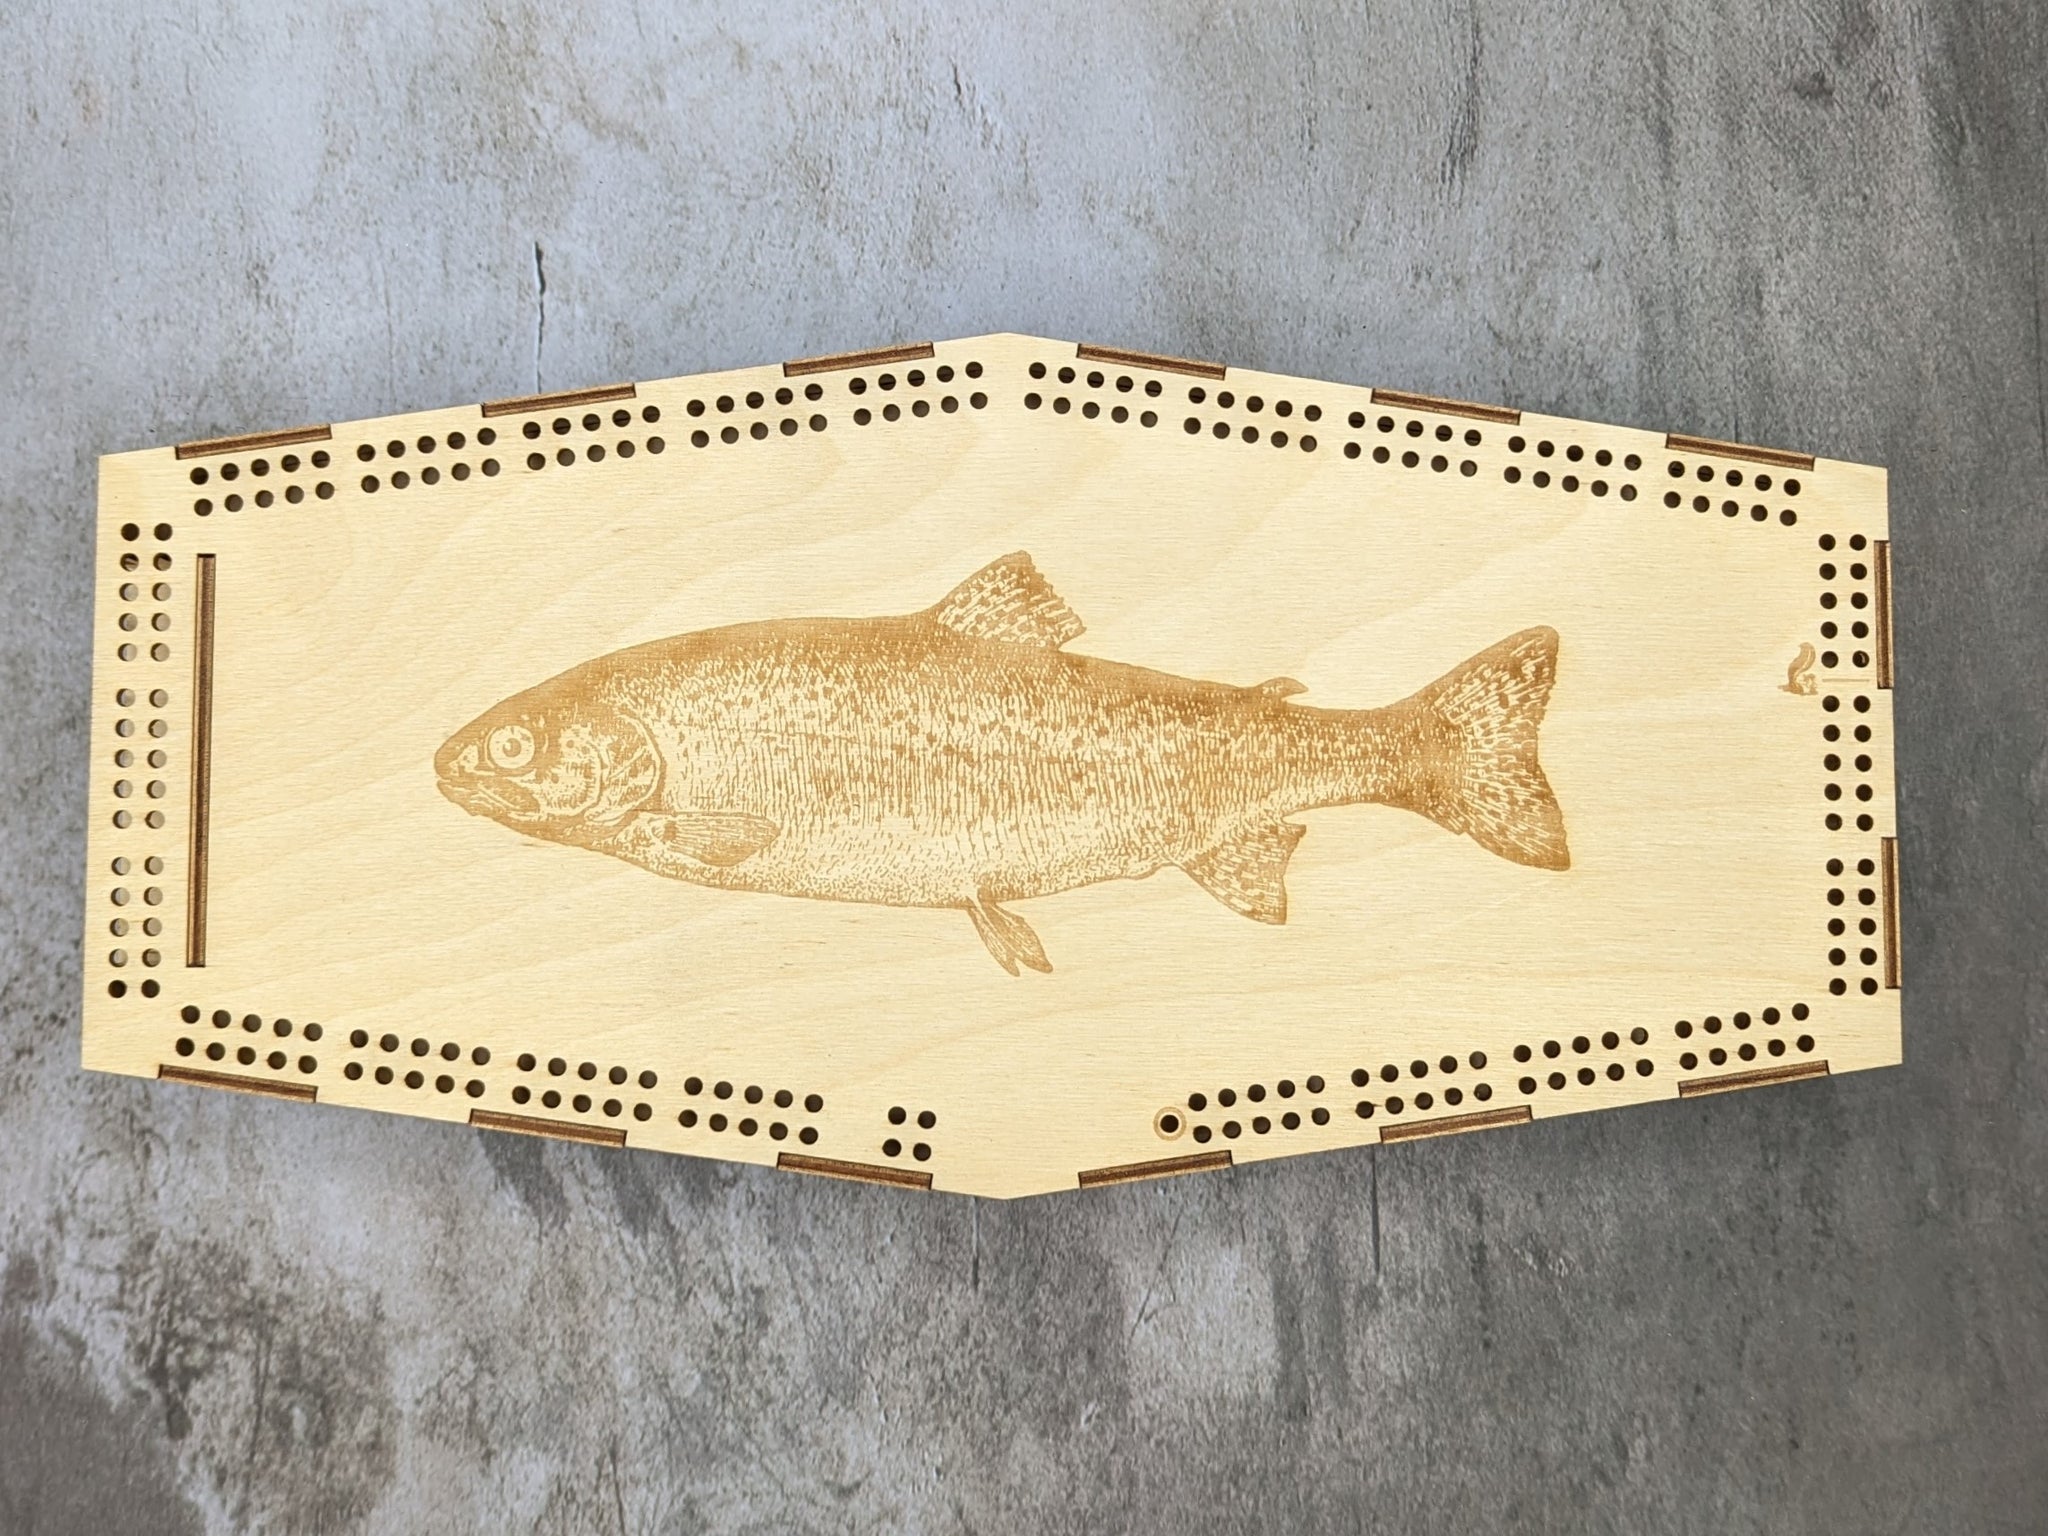 Cribbage Board - hexagonal shape with trout design